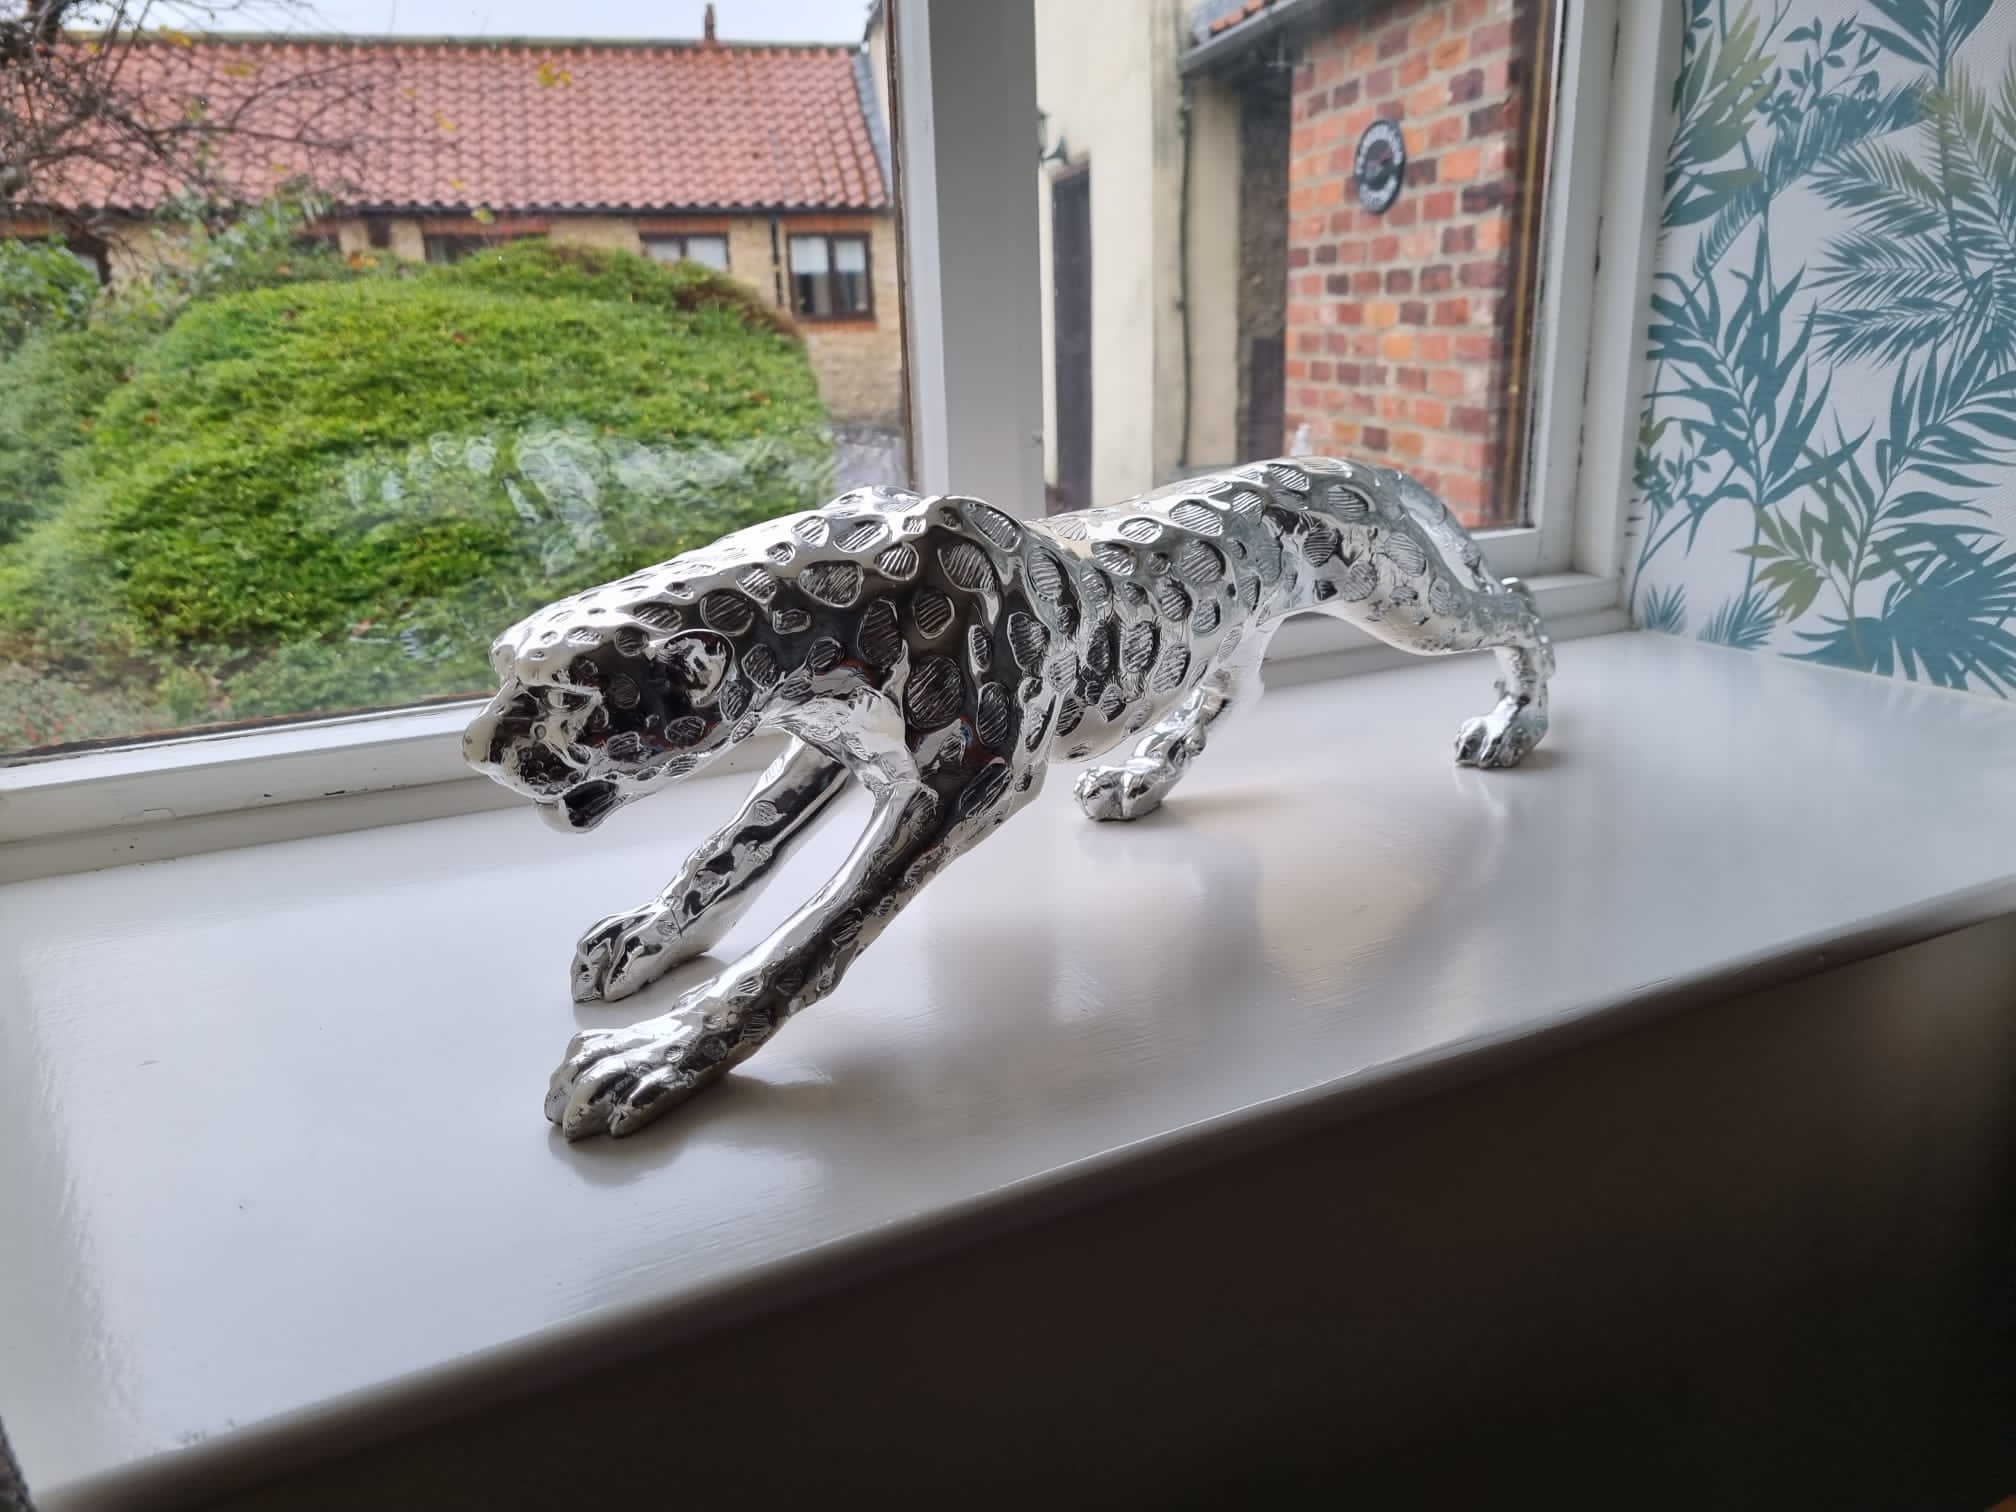 a jaguar sculpture in the window of Daleview cottage